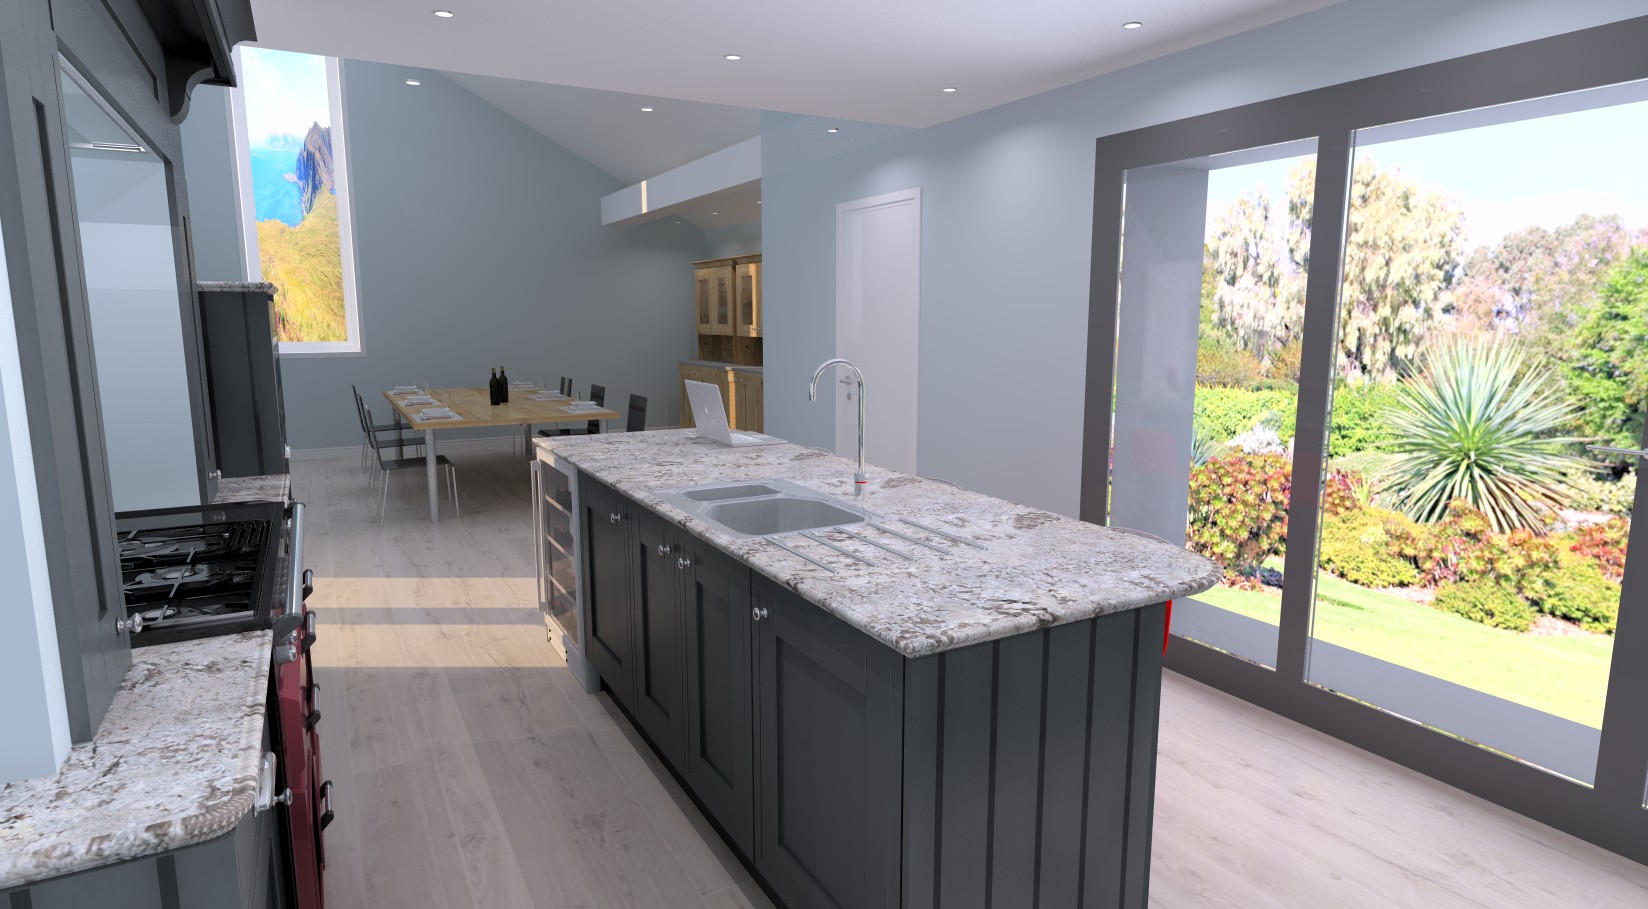 Time on your hands? Why not plan a new kitchen with our online 3D kitchen planner?